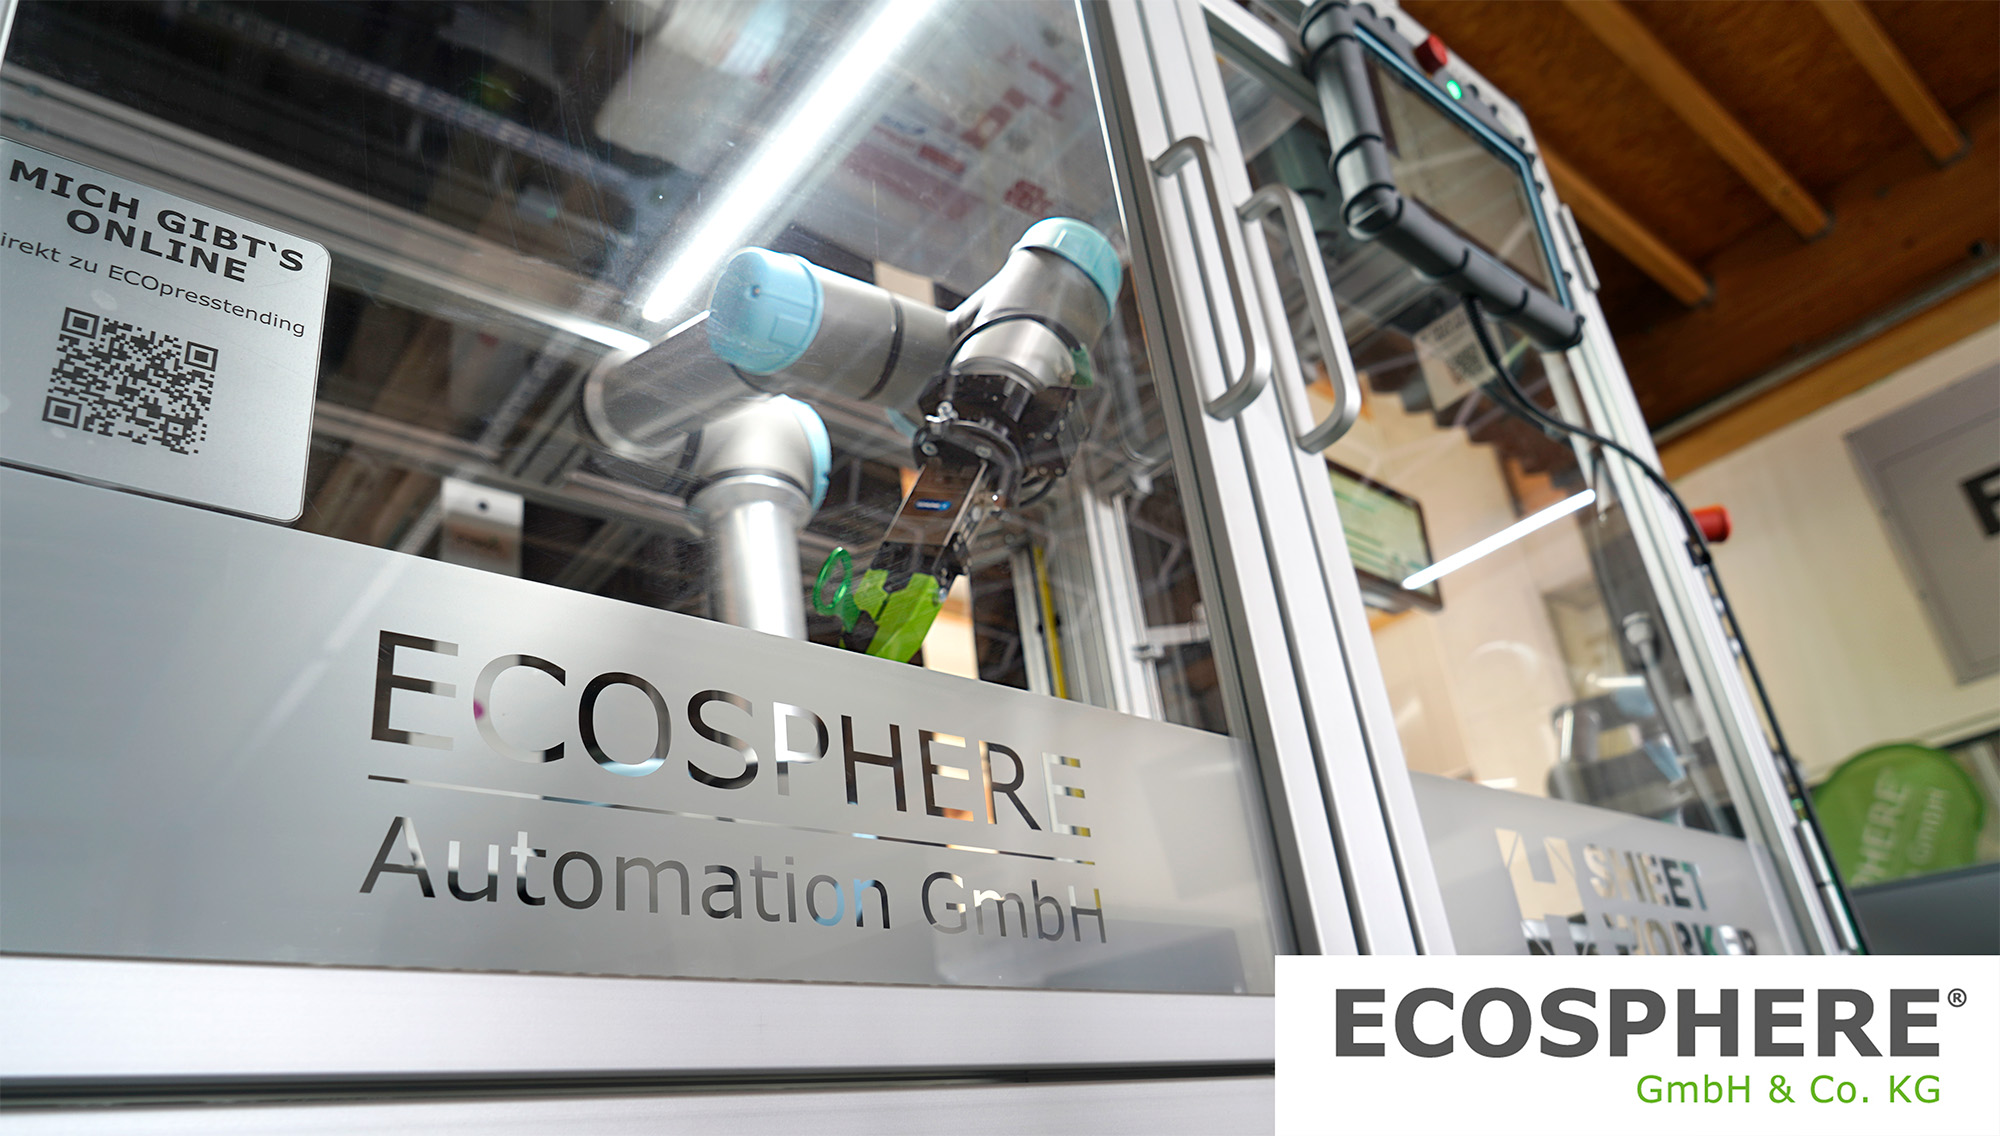 ECOSPHERE GmbH & Co. KG